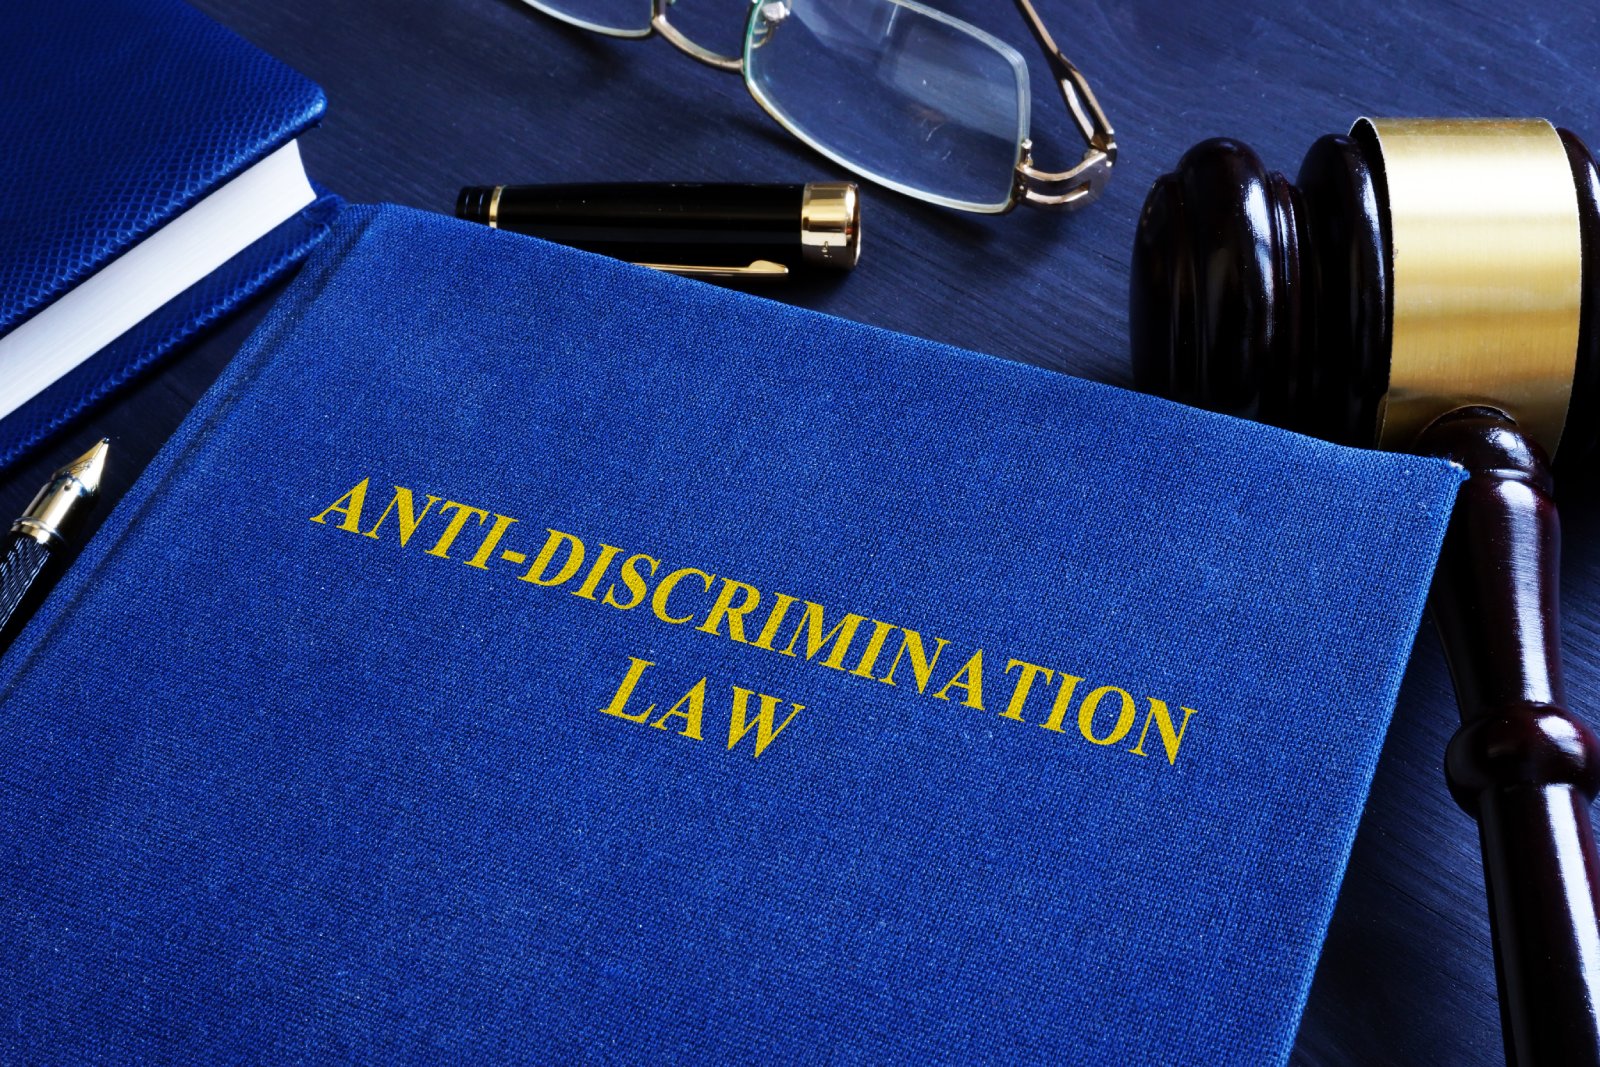 Image Credit: Shutterstock / Vitalii Vodolazskyi <p><span>LGBT activists, between the 1964 Civil Rights Act and the Bostock decision, sought a queer carve-out in federal antidiscrimination law, indicating a historical reluctance to consider the Civil Rights Act as protecting queer identities.</span></p>